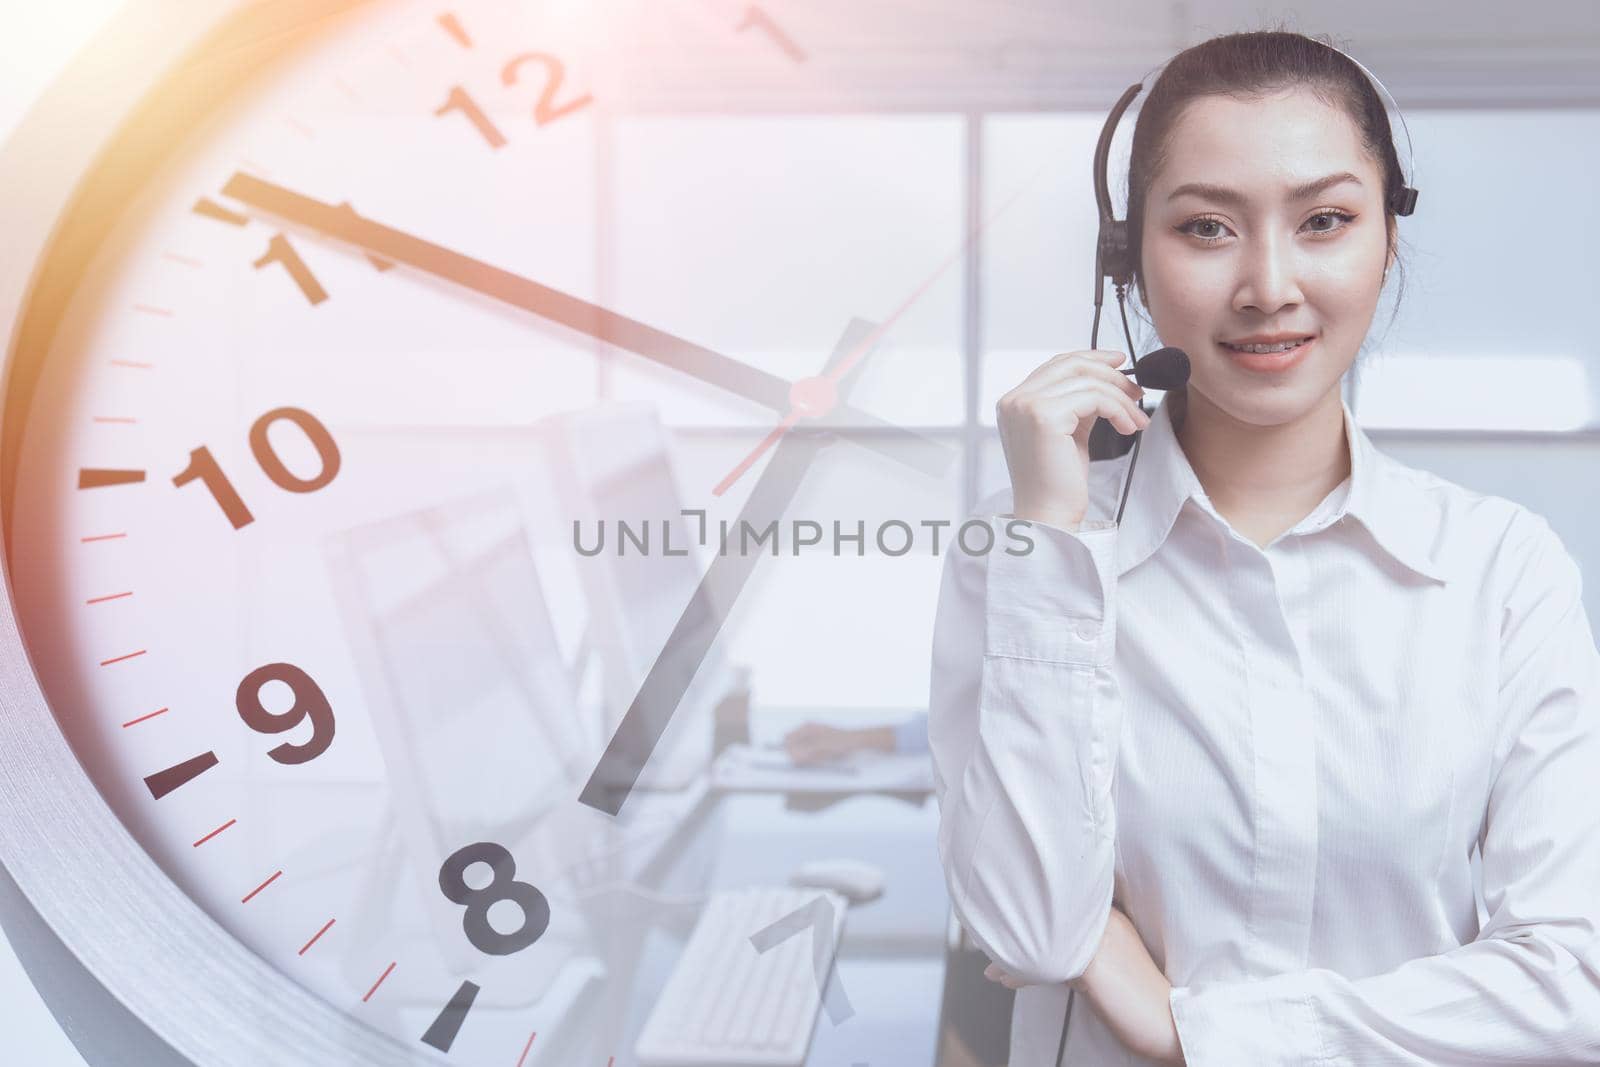 Customer Support and Care in time with smile. Fast Contact Hotline Call center team in office working hours times clock concept.